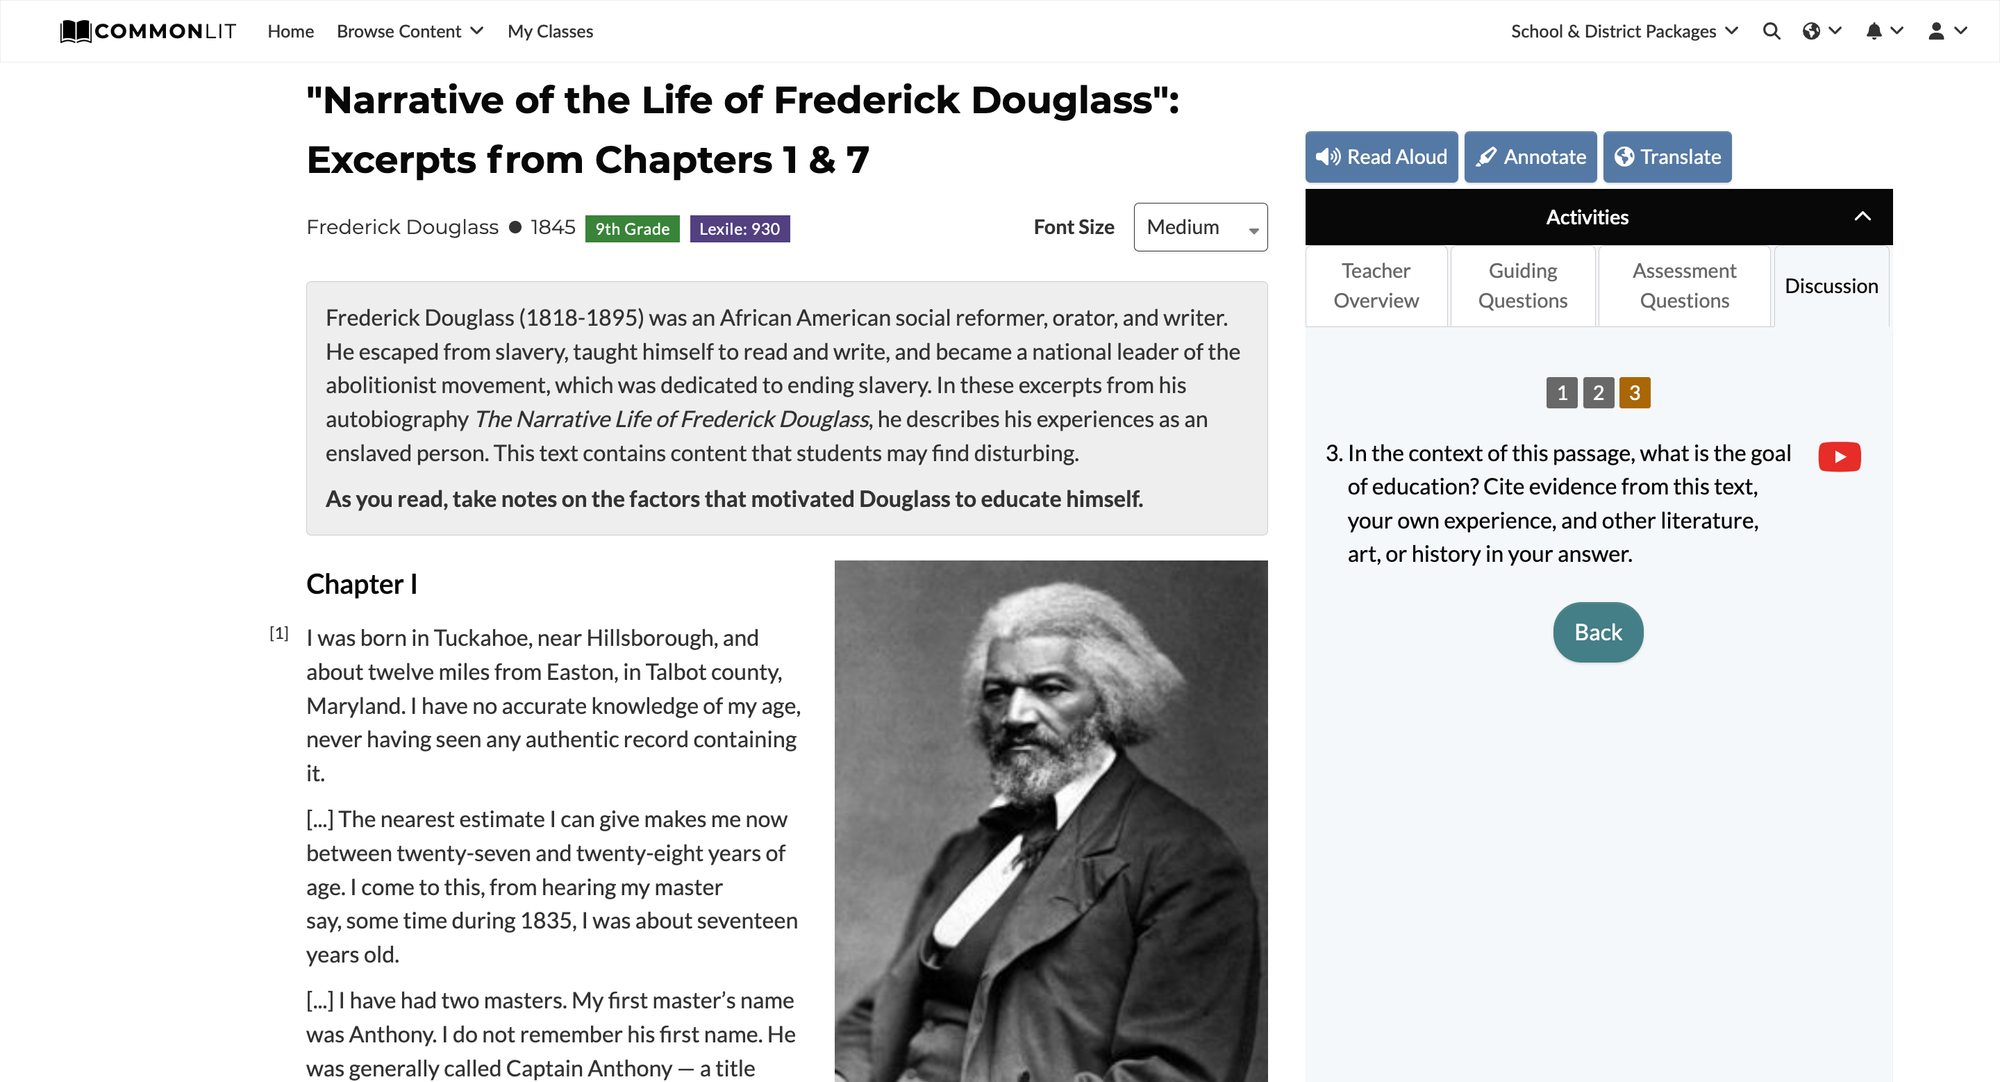 Screenshot of one of the best memoirs for high school students. It is about Frederick Douglass. On the right side there is a discussion question, designed to encourage high school students to delve deeper into the text.